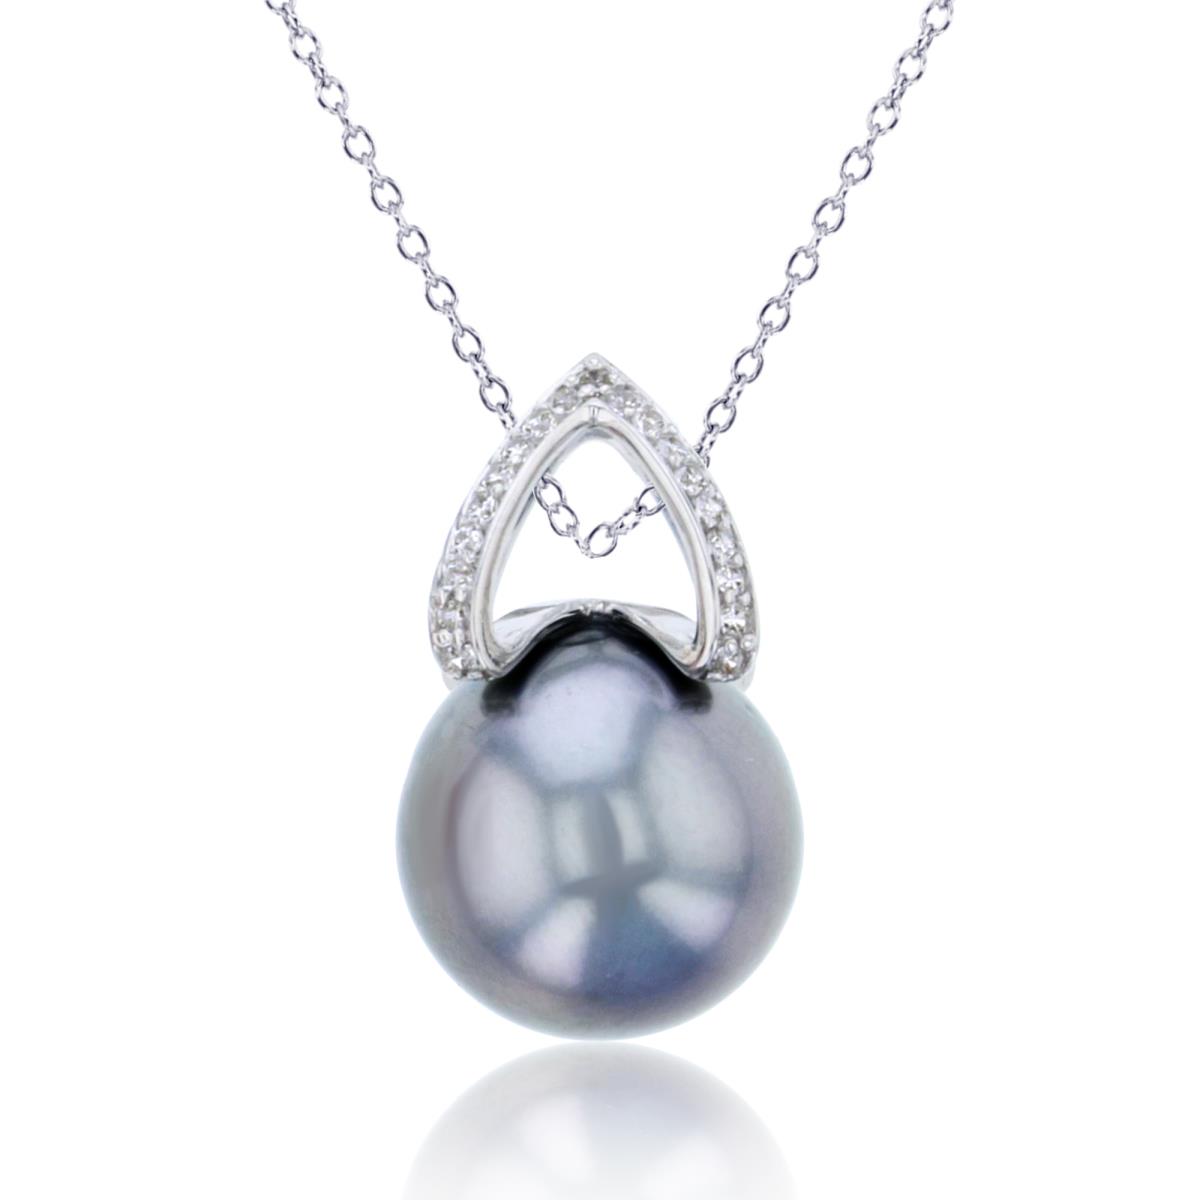 14K White Gold 0.08cttw Rnd Diamonds & 12mm Rnd Tahitian Pearl 18"Necklace